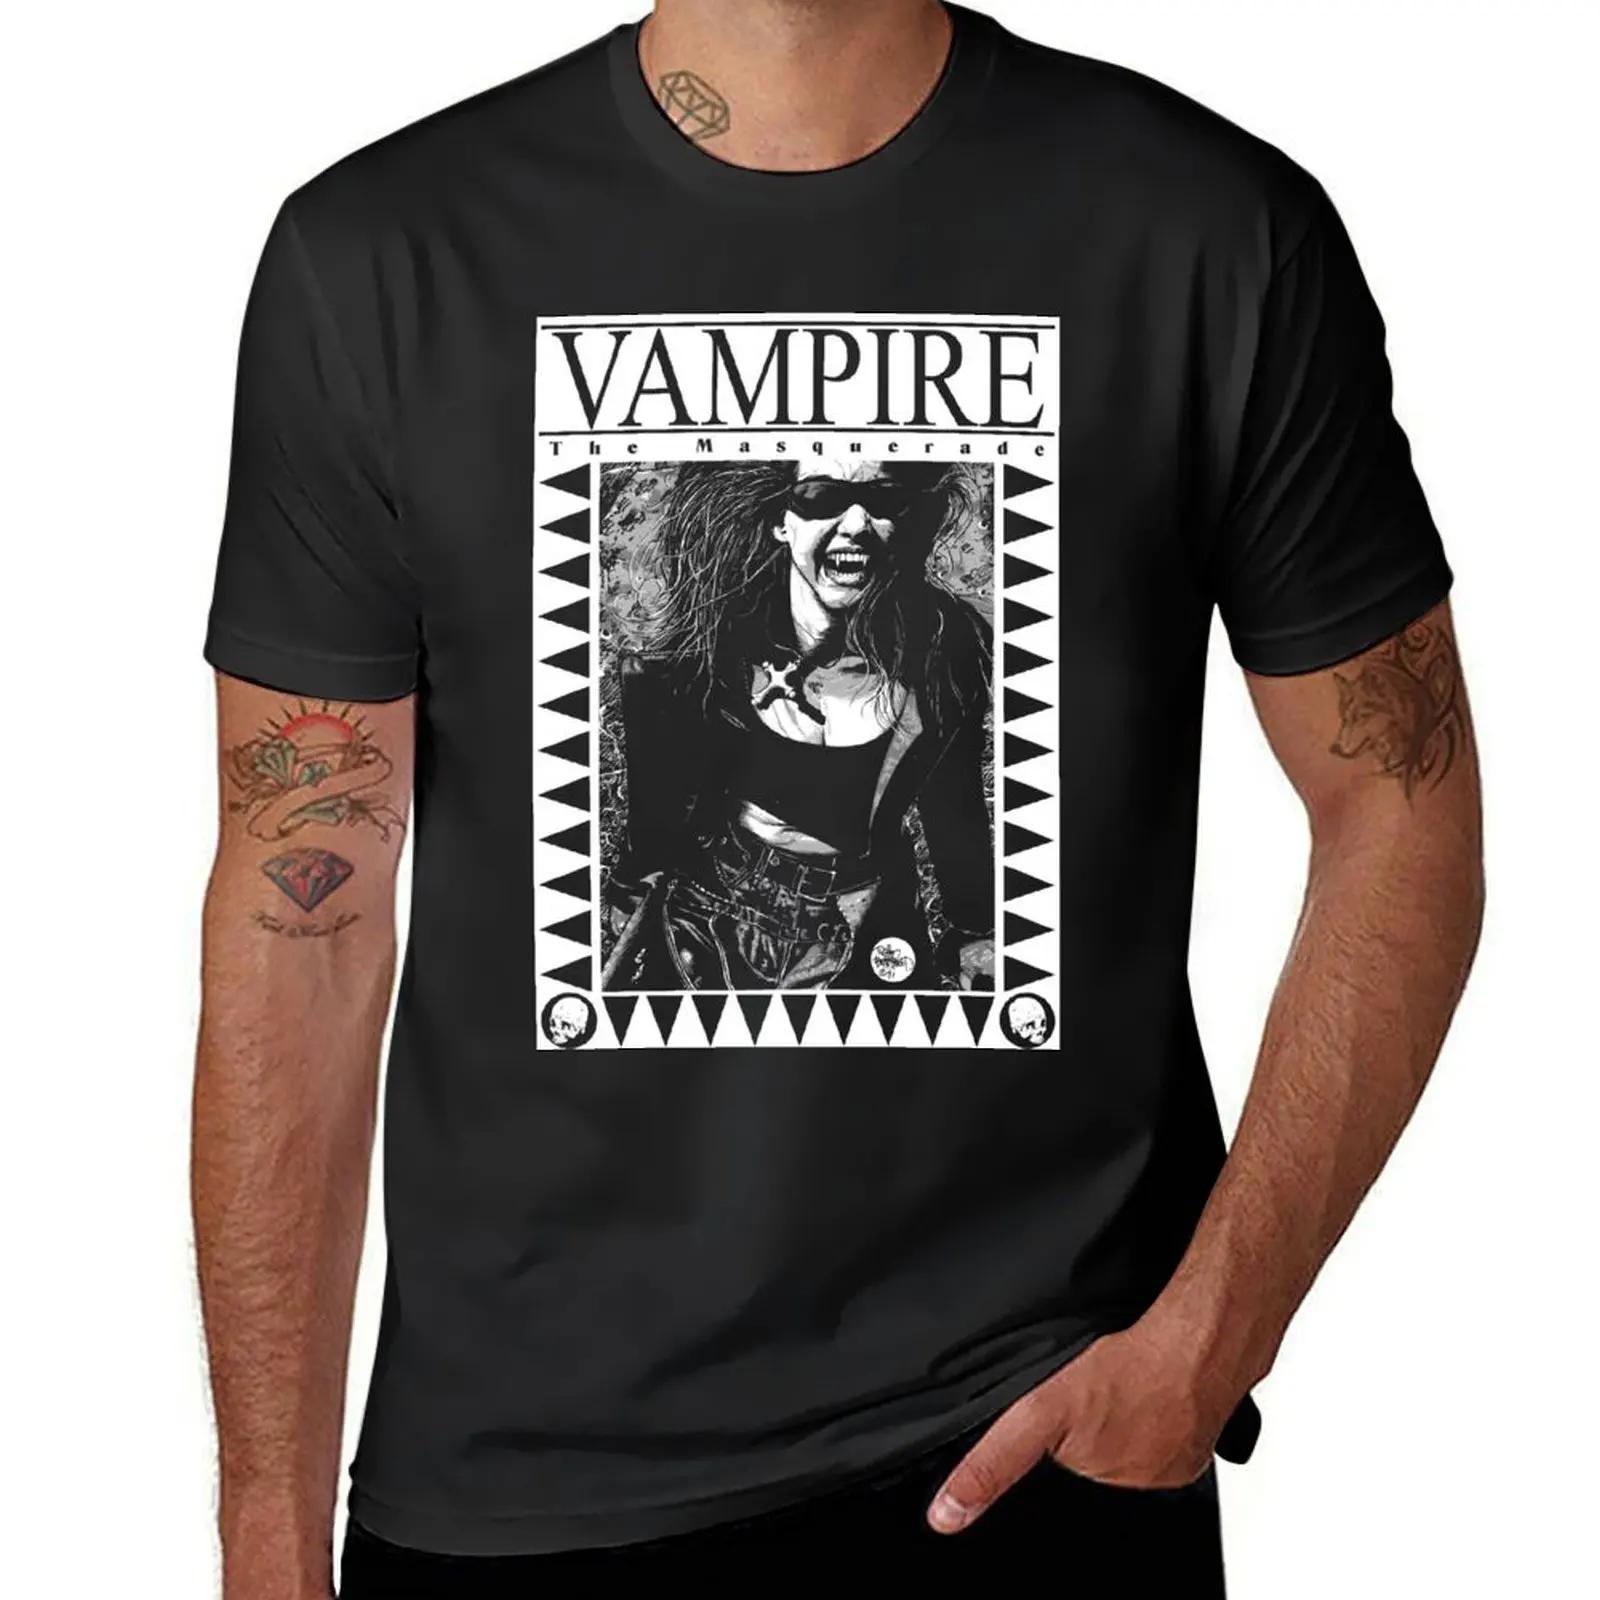 

Retro Vampire: The Masquerade T-Shirt quick drying vintage clothes for men